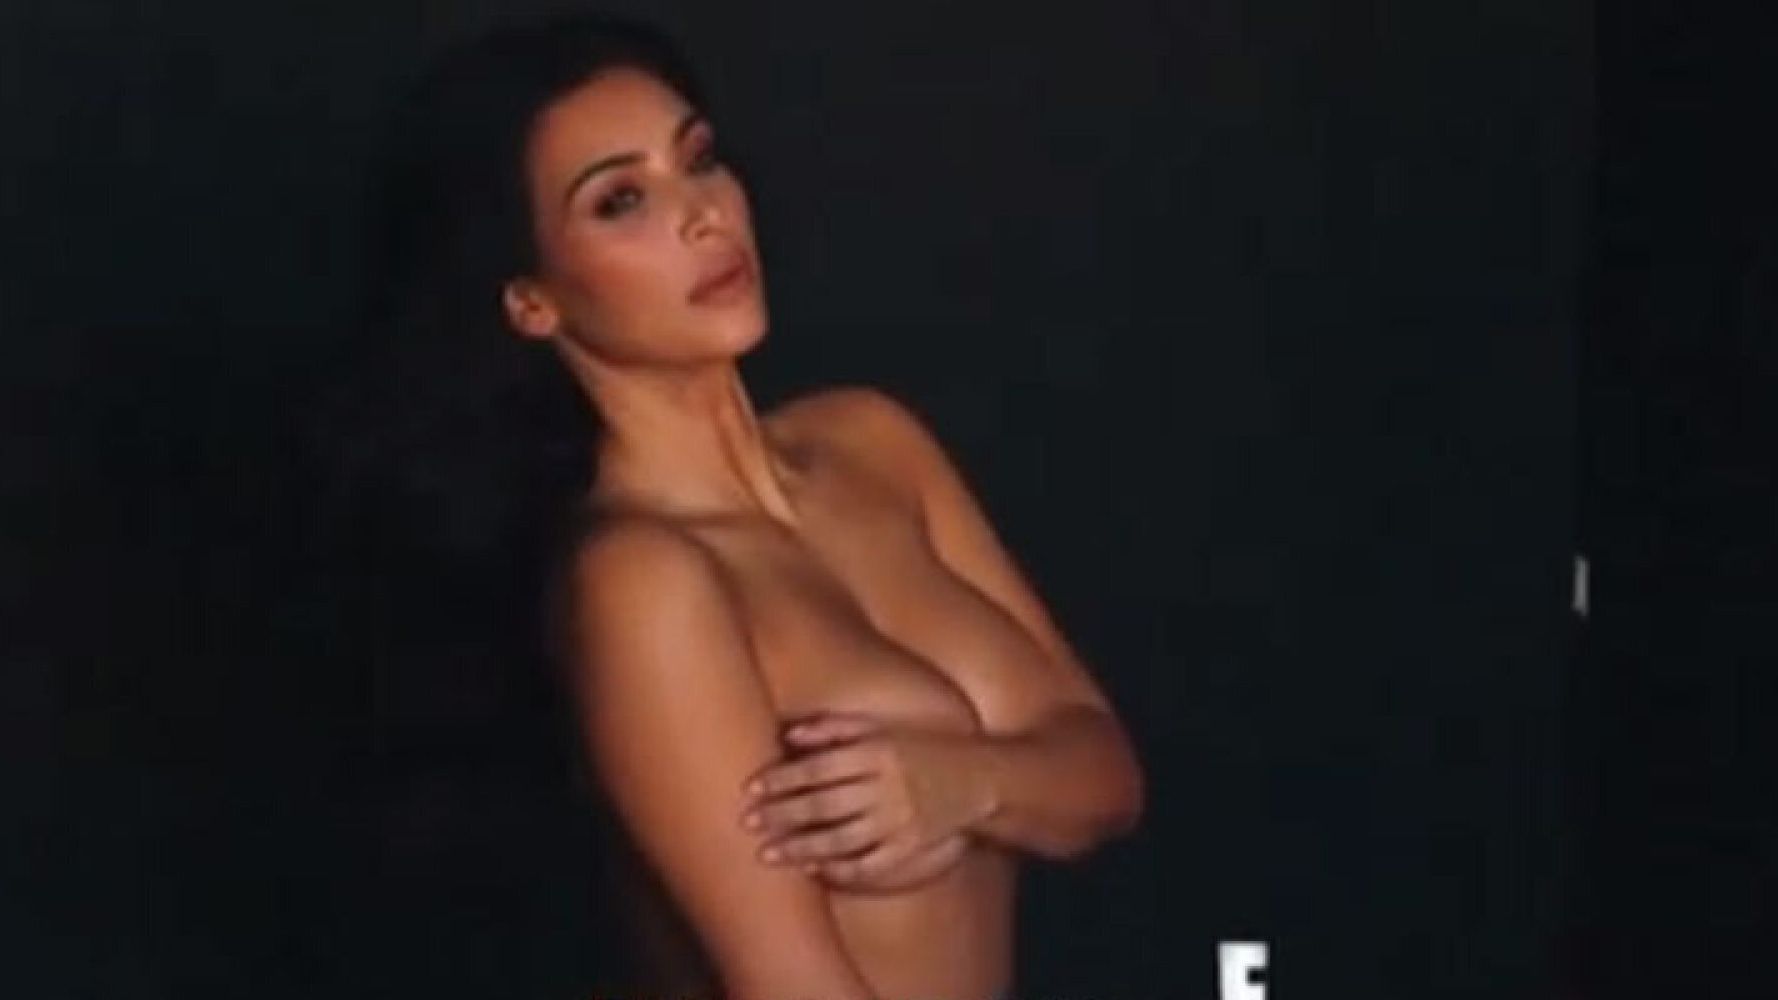 Kim Kardashian Naked: 'Keeping Up With The Kardashians' Star Goes Nude  (Again) In Trailer For New Series (PICS) | HuffPost UK Entertainment